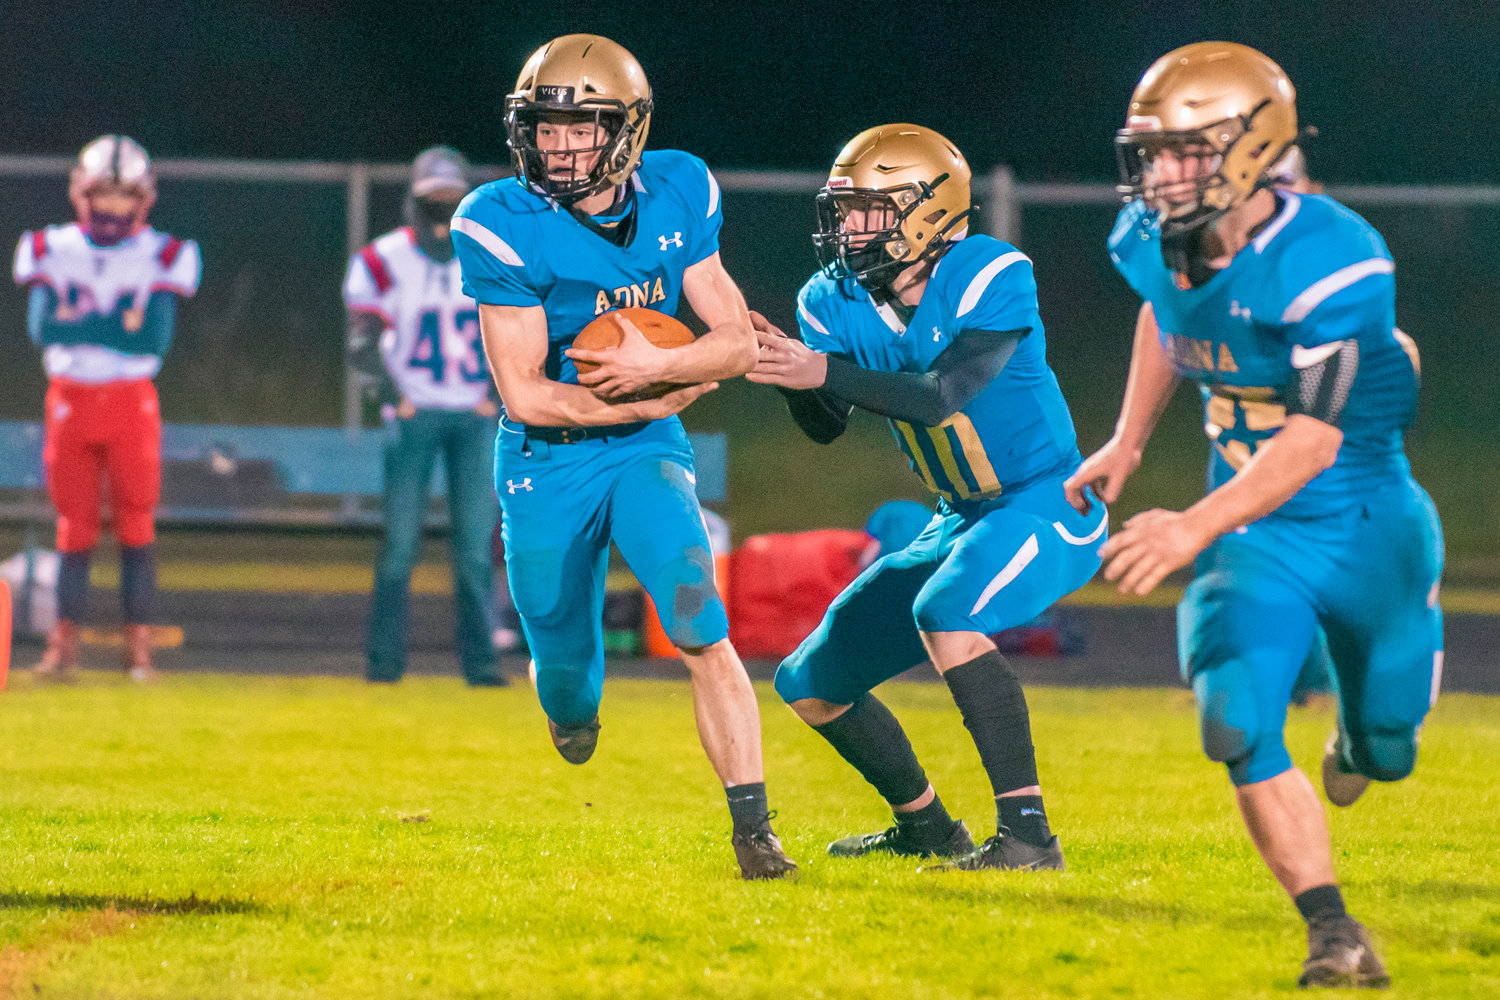 Adna’s Lane Johnson (10) hands the ball off to Tristan Ridley (9) during a game against PWV in Adna on Wednesday.